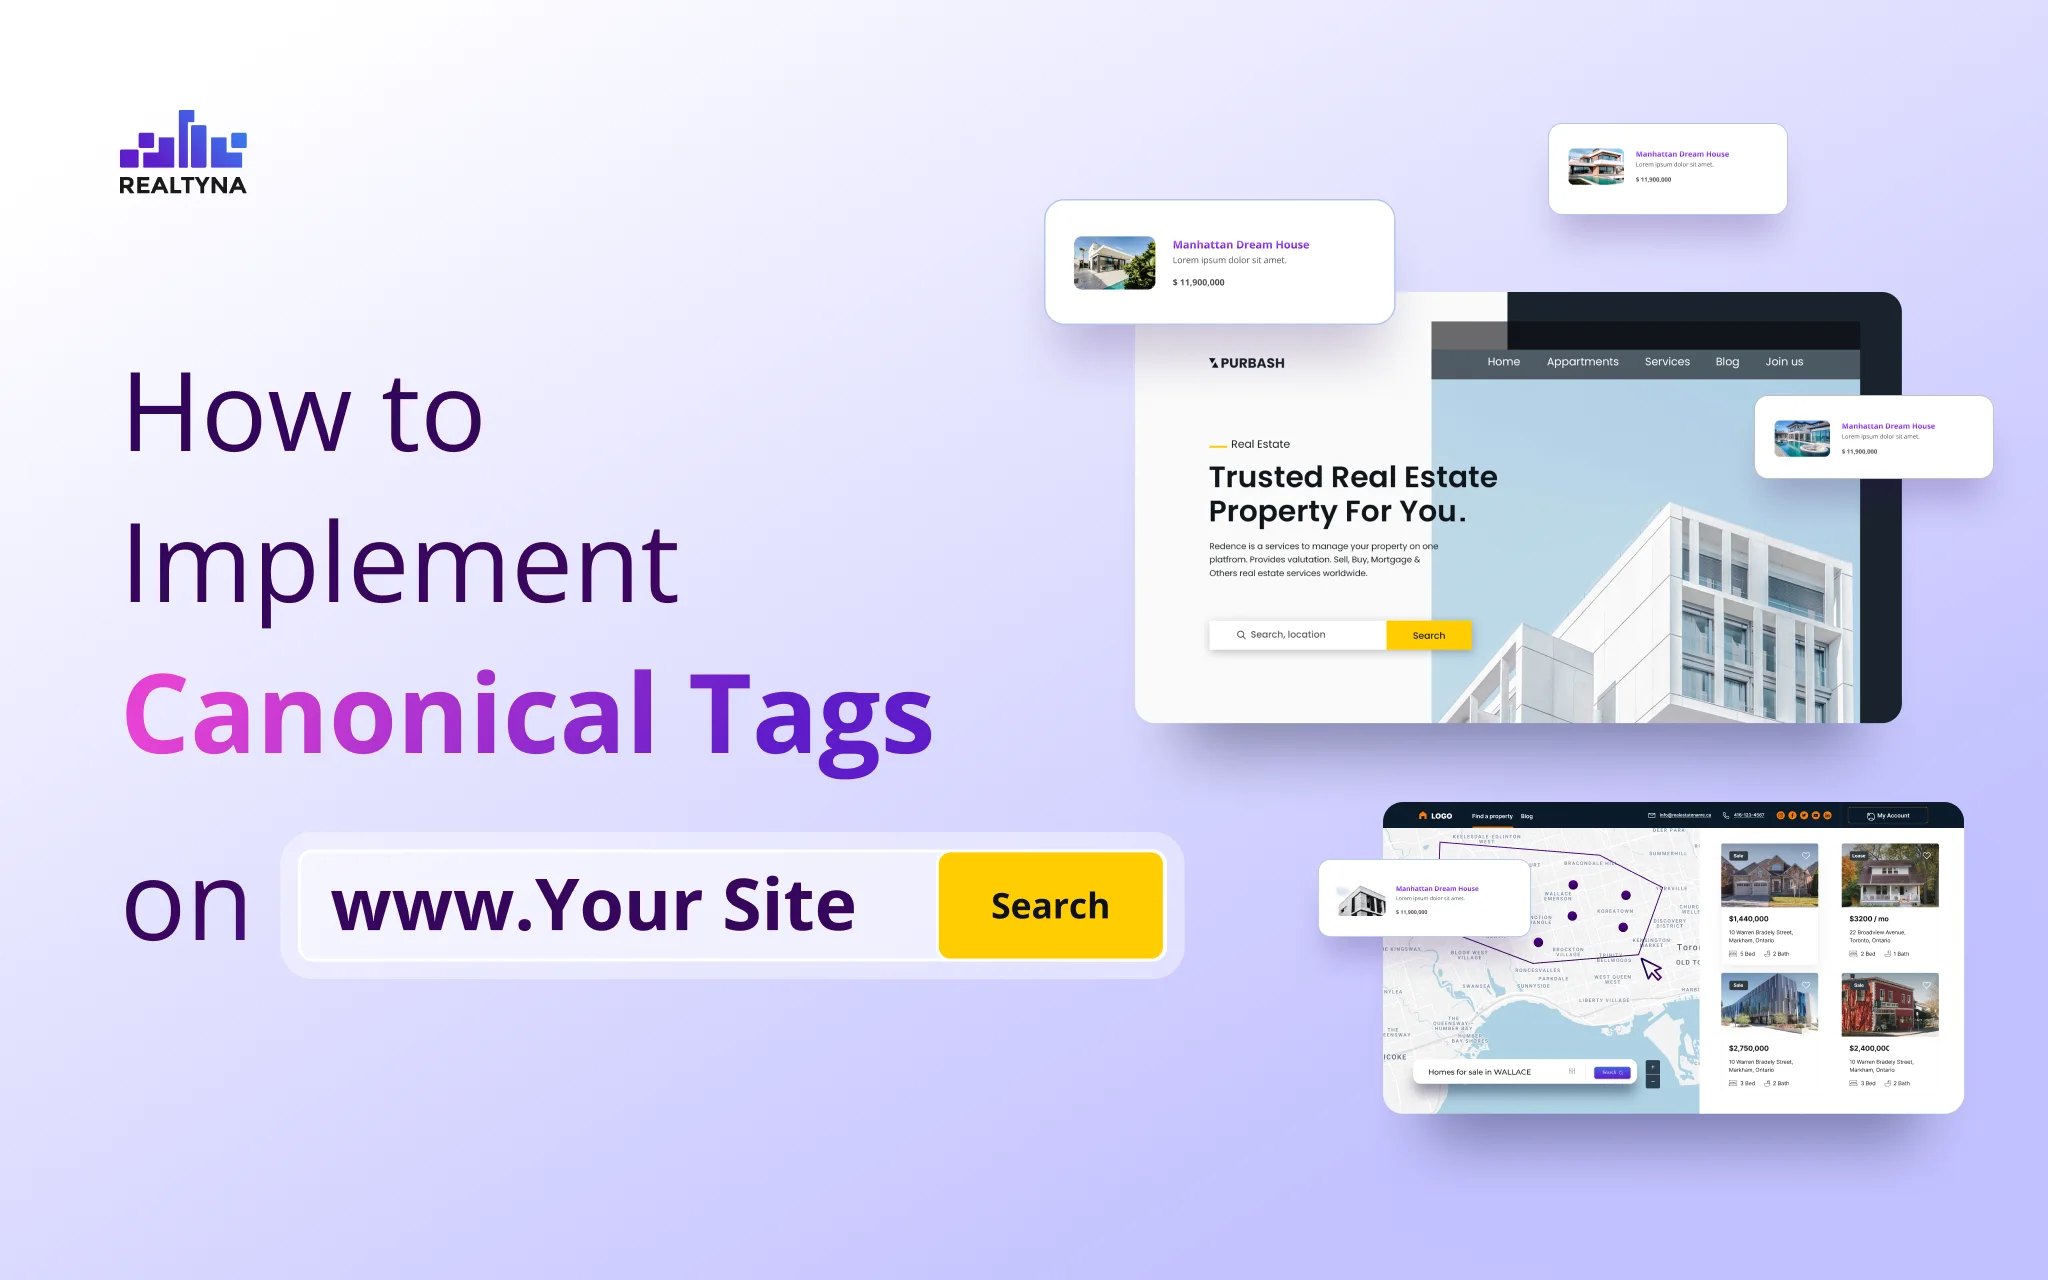 How to Implement Canonical Tags on Your Site